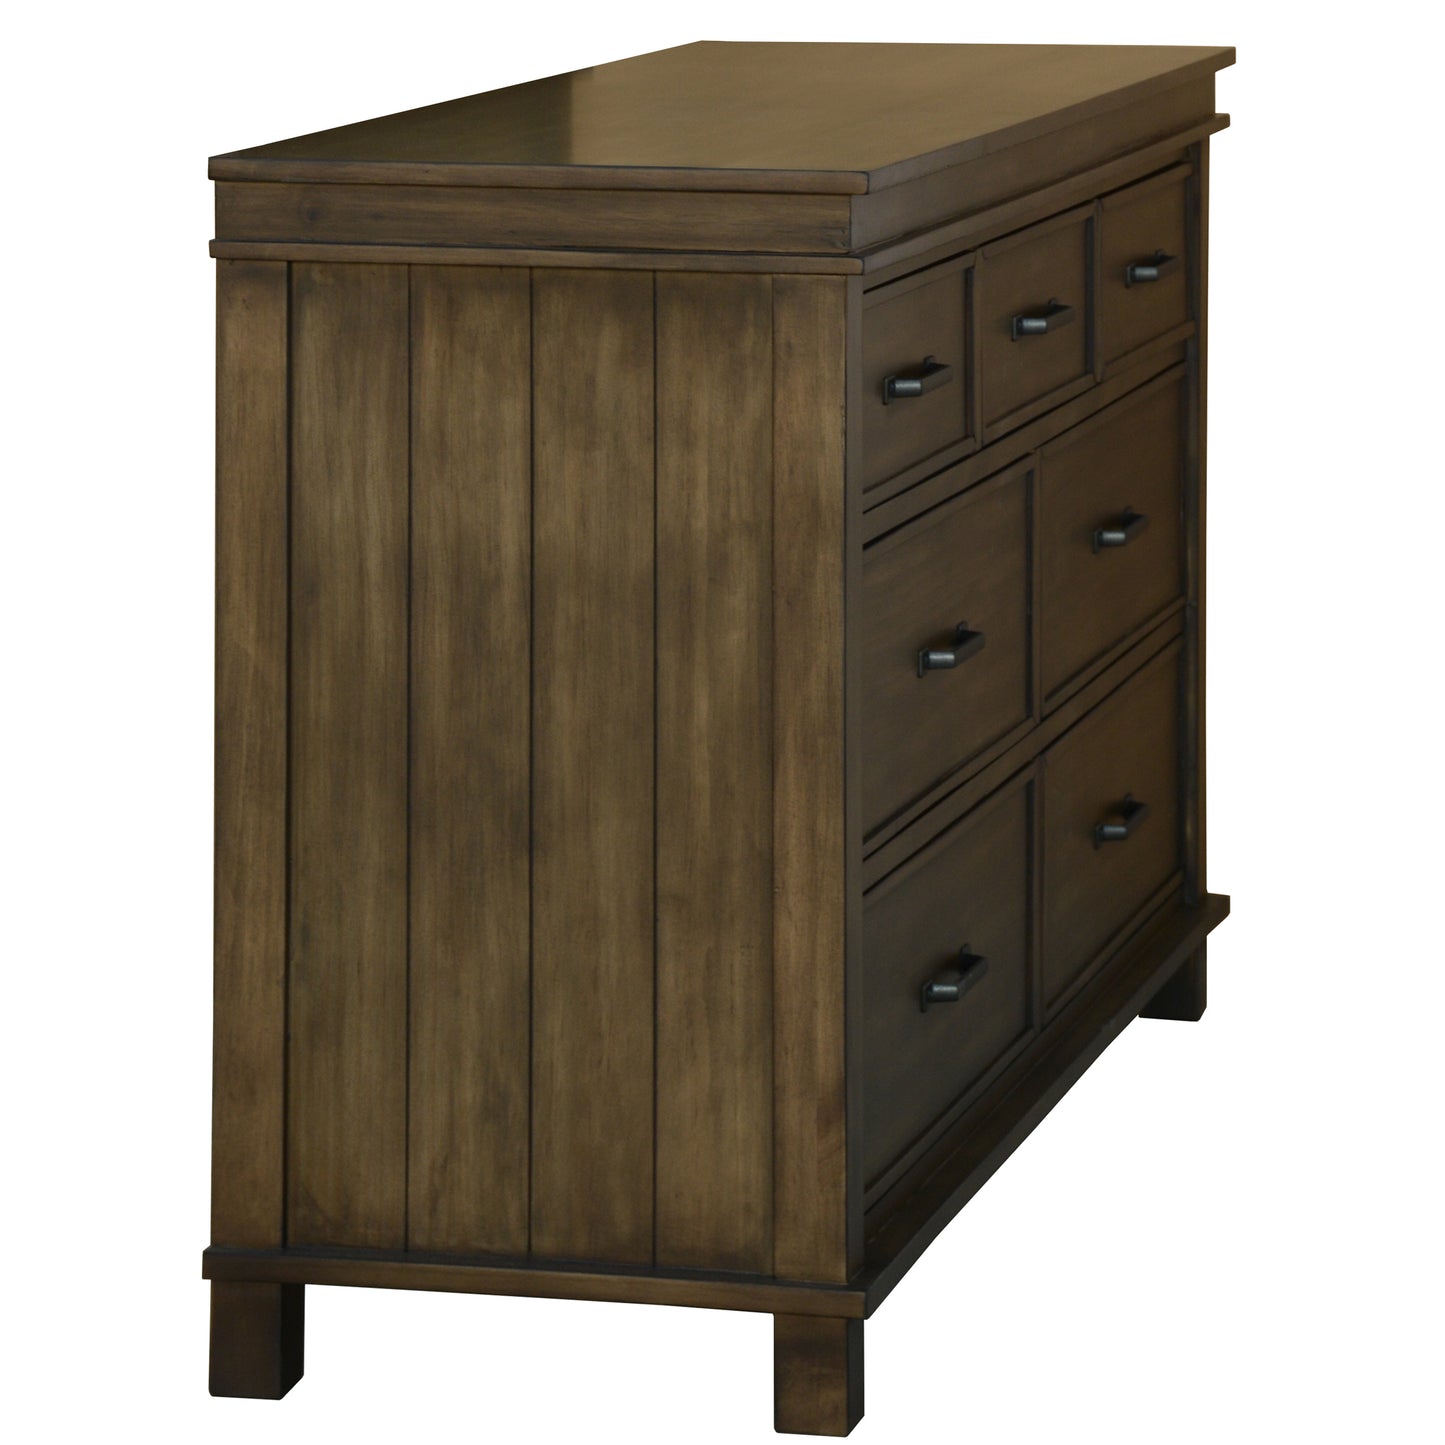 Lily Dresser 7 Chest of Drawers Solid Wood Tallboy Storage Cabinet - Rustic Grey